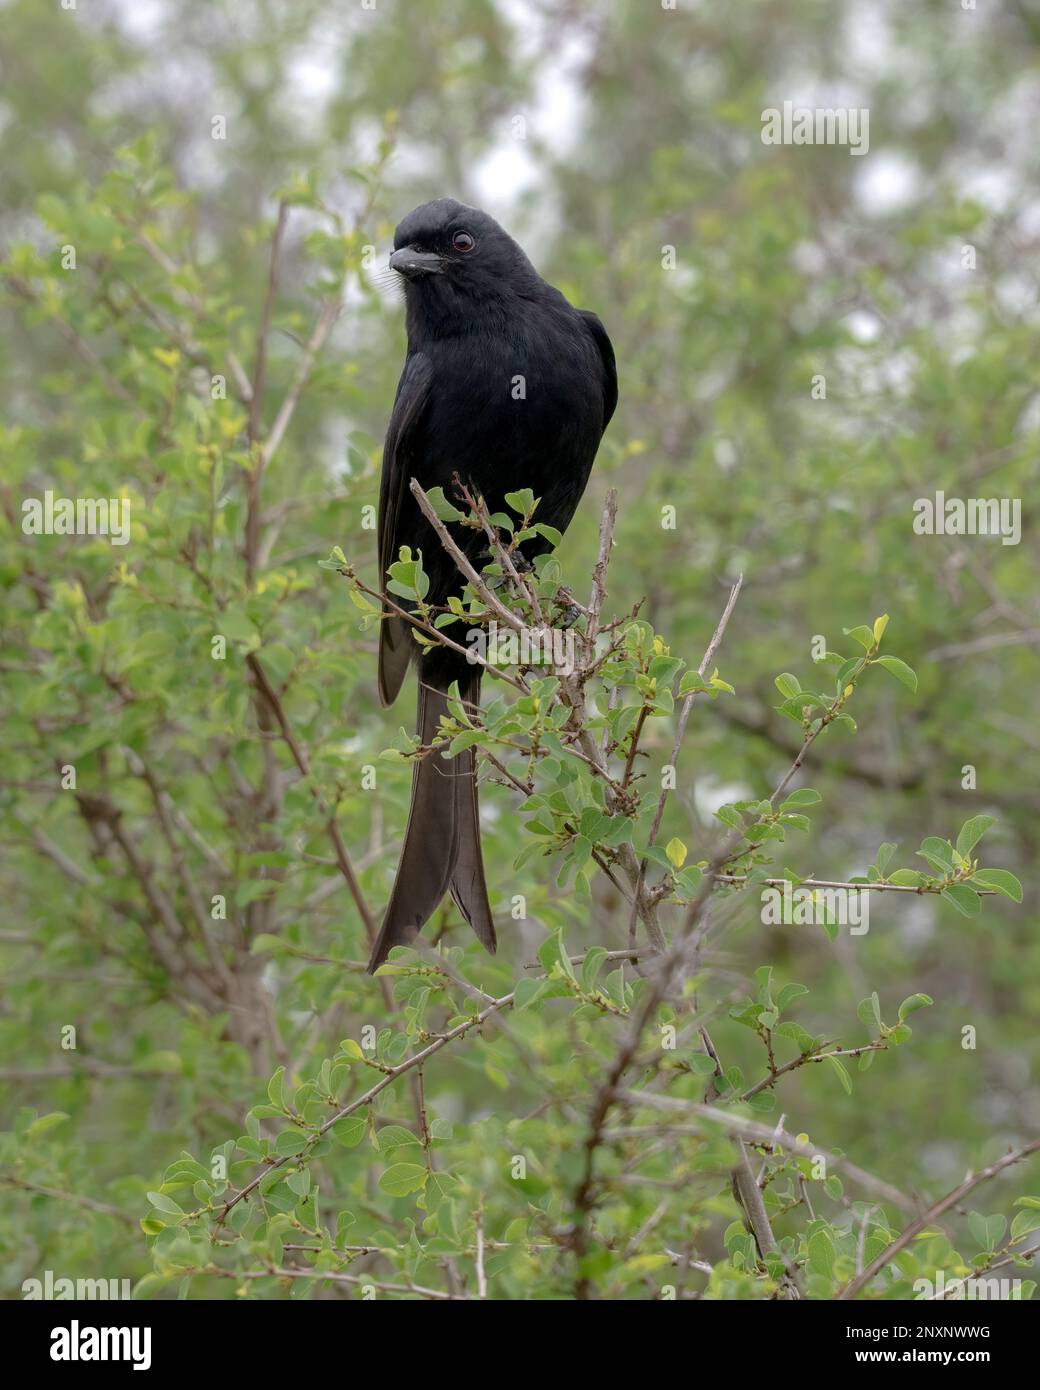 A Fork-tailed Drongo perched in a Bush in South Africa Stock Photo